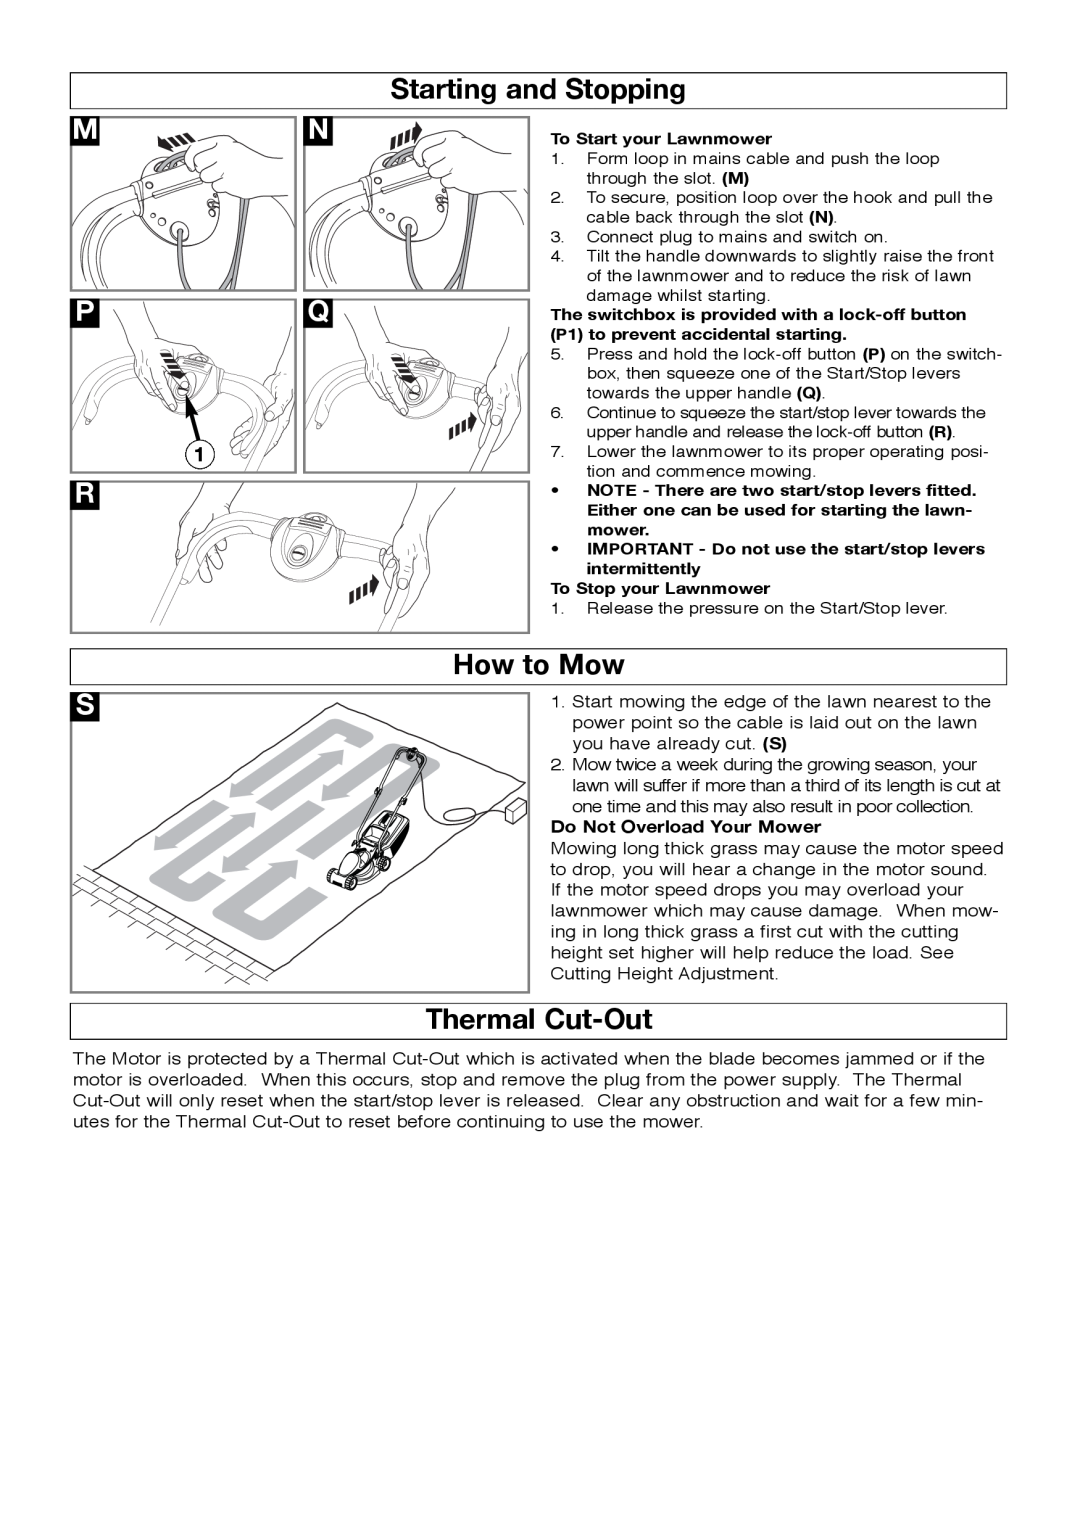 Flymo RM032, EM032 manual Starting and Stopping, How to Mow, Thermal Cut-Out, Do Not Overload Your Mower 